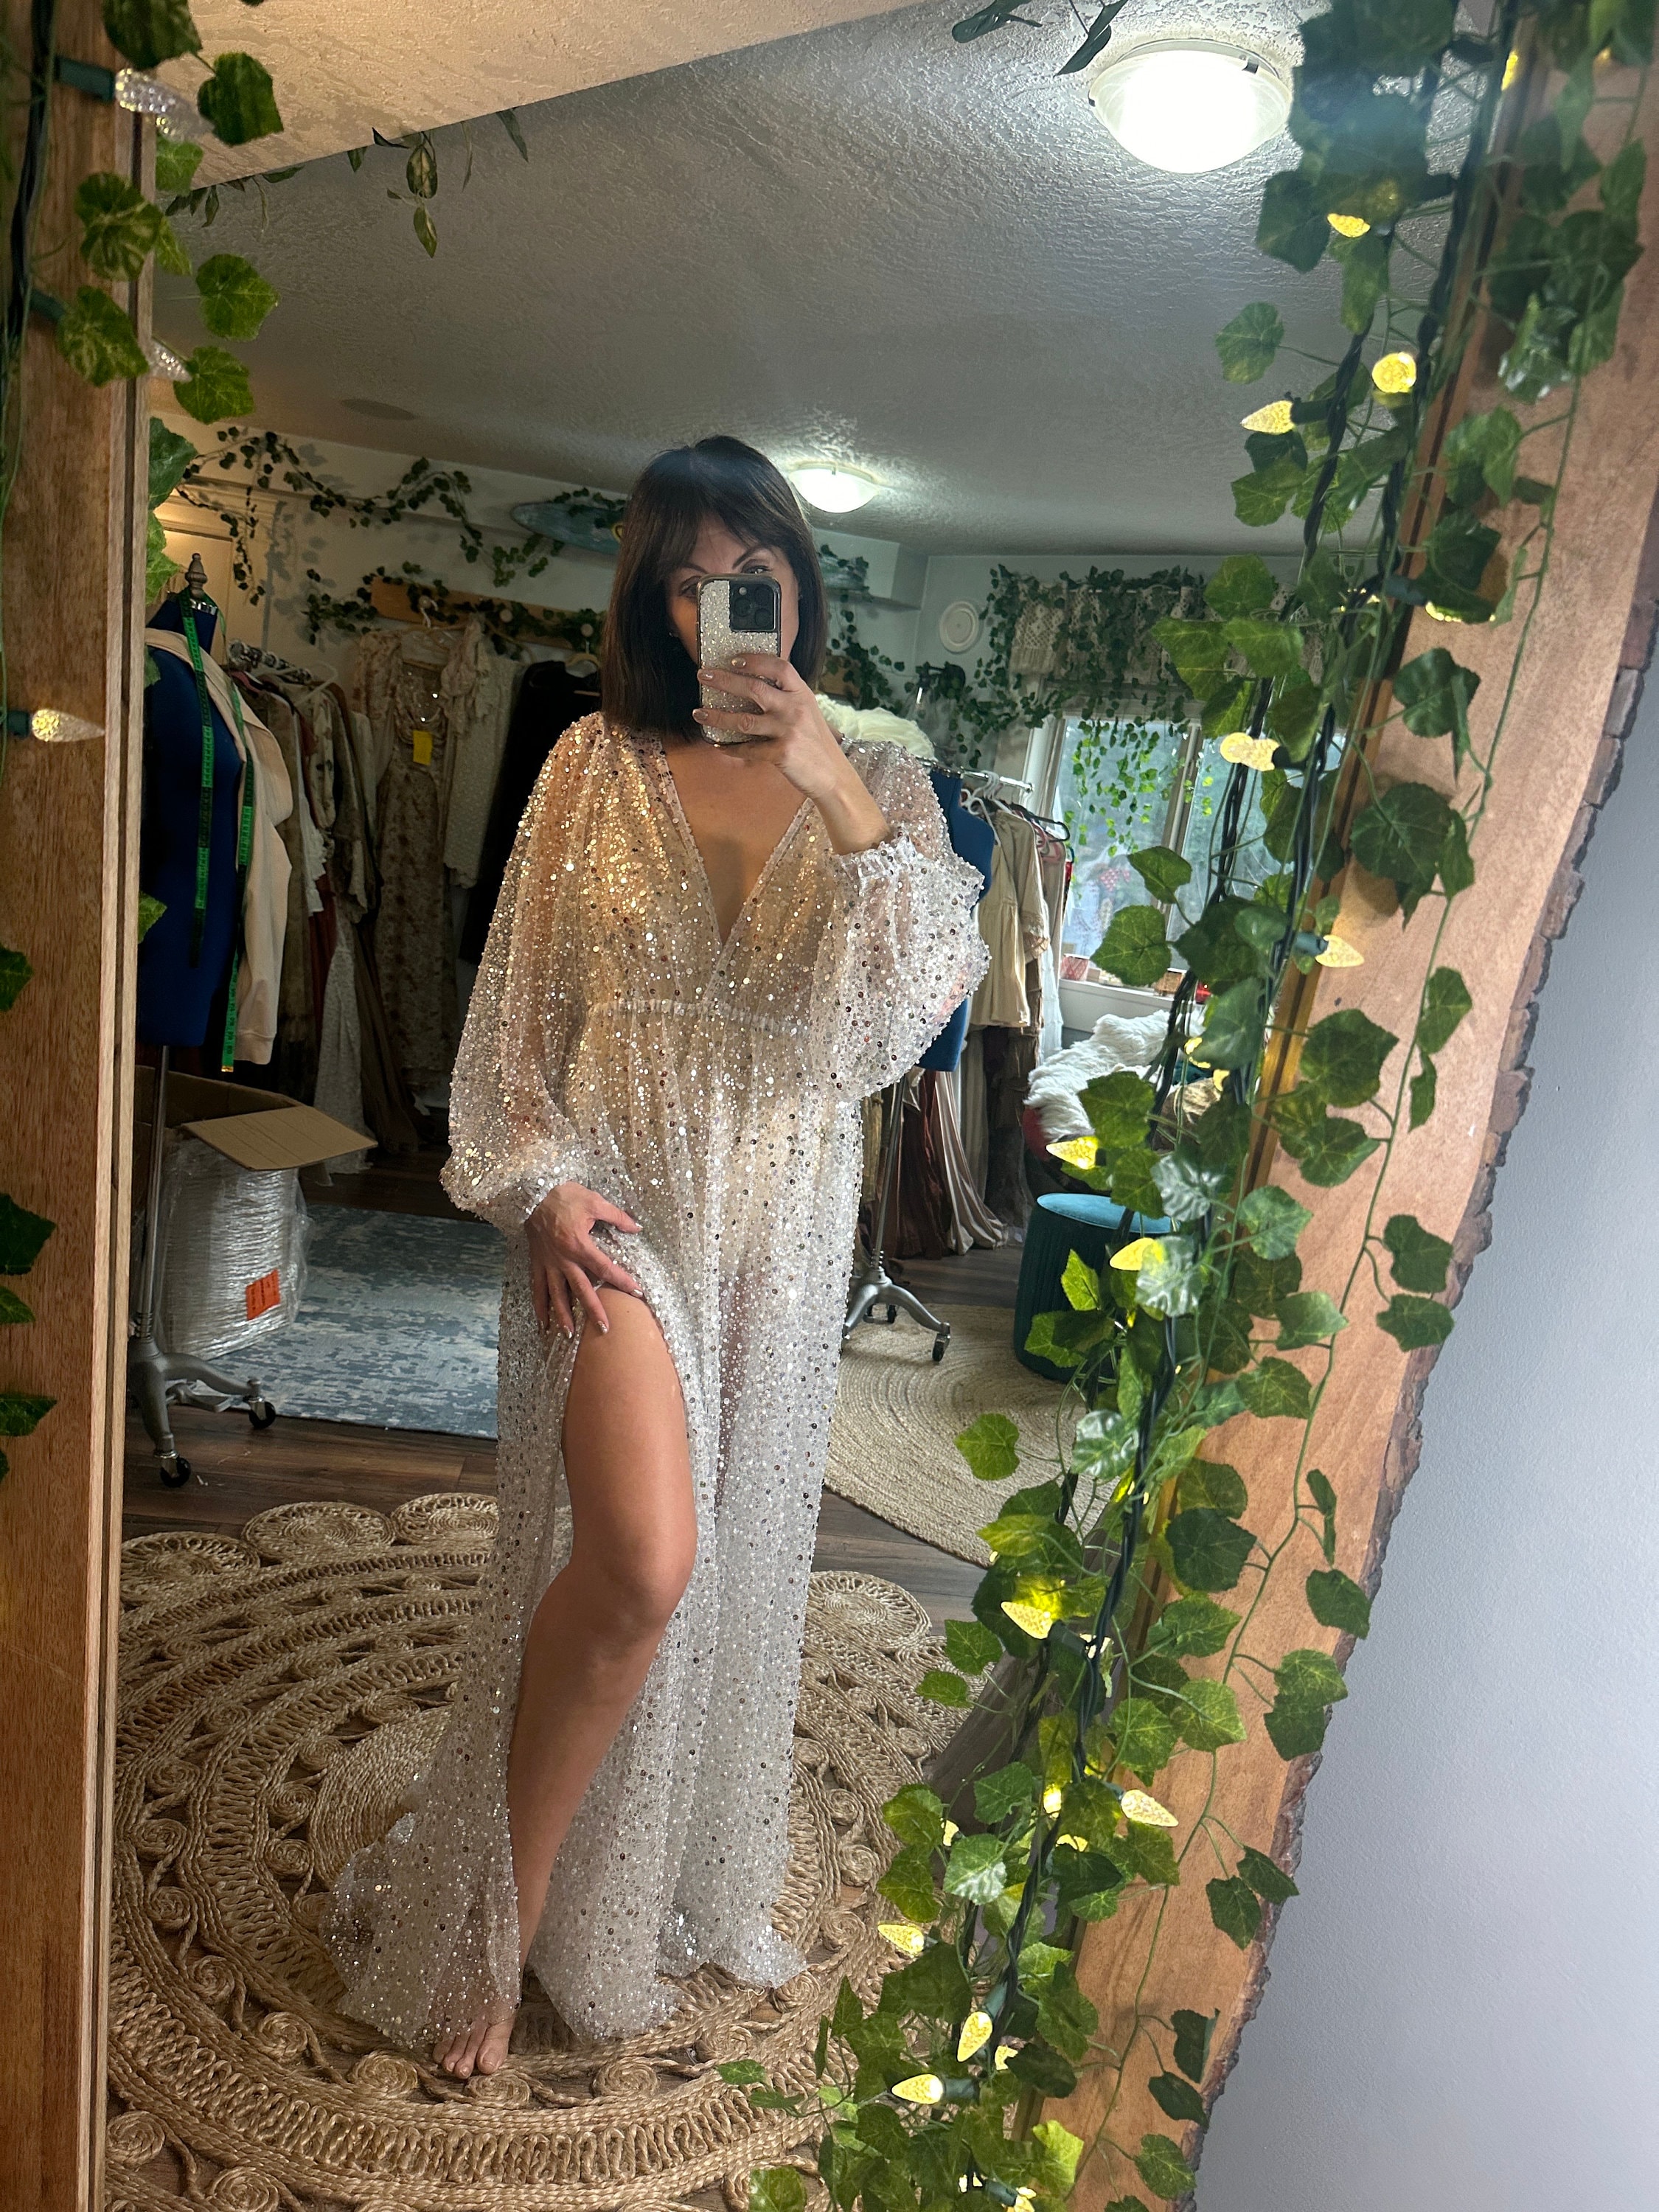 Gold/luxurious/sequins/maternity Bodysuit/maternity Dress for Photo Shoot/ maternity Onesie/sequins Onesie/maternity Wedding Dress 